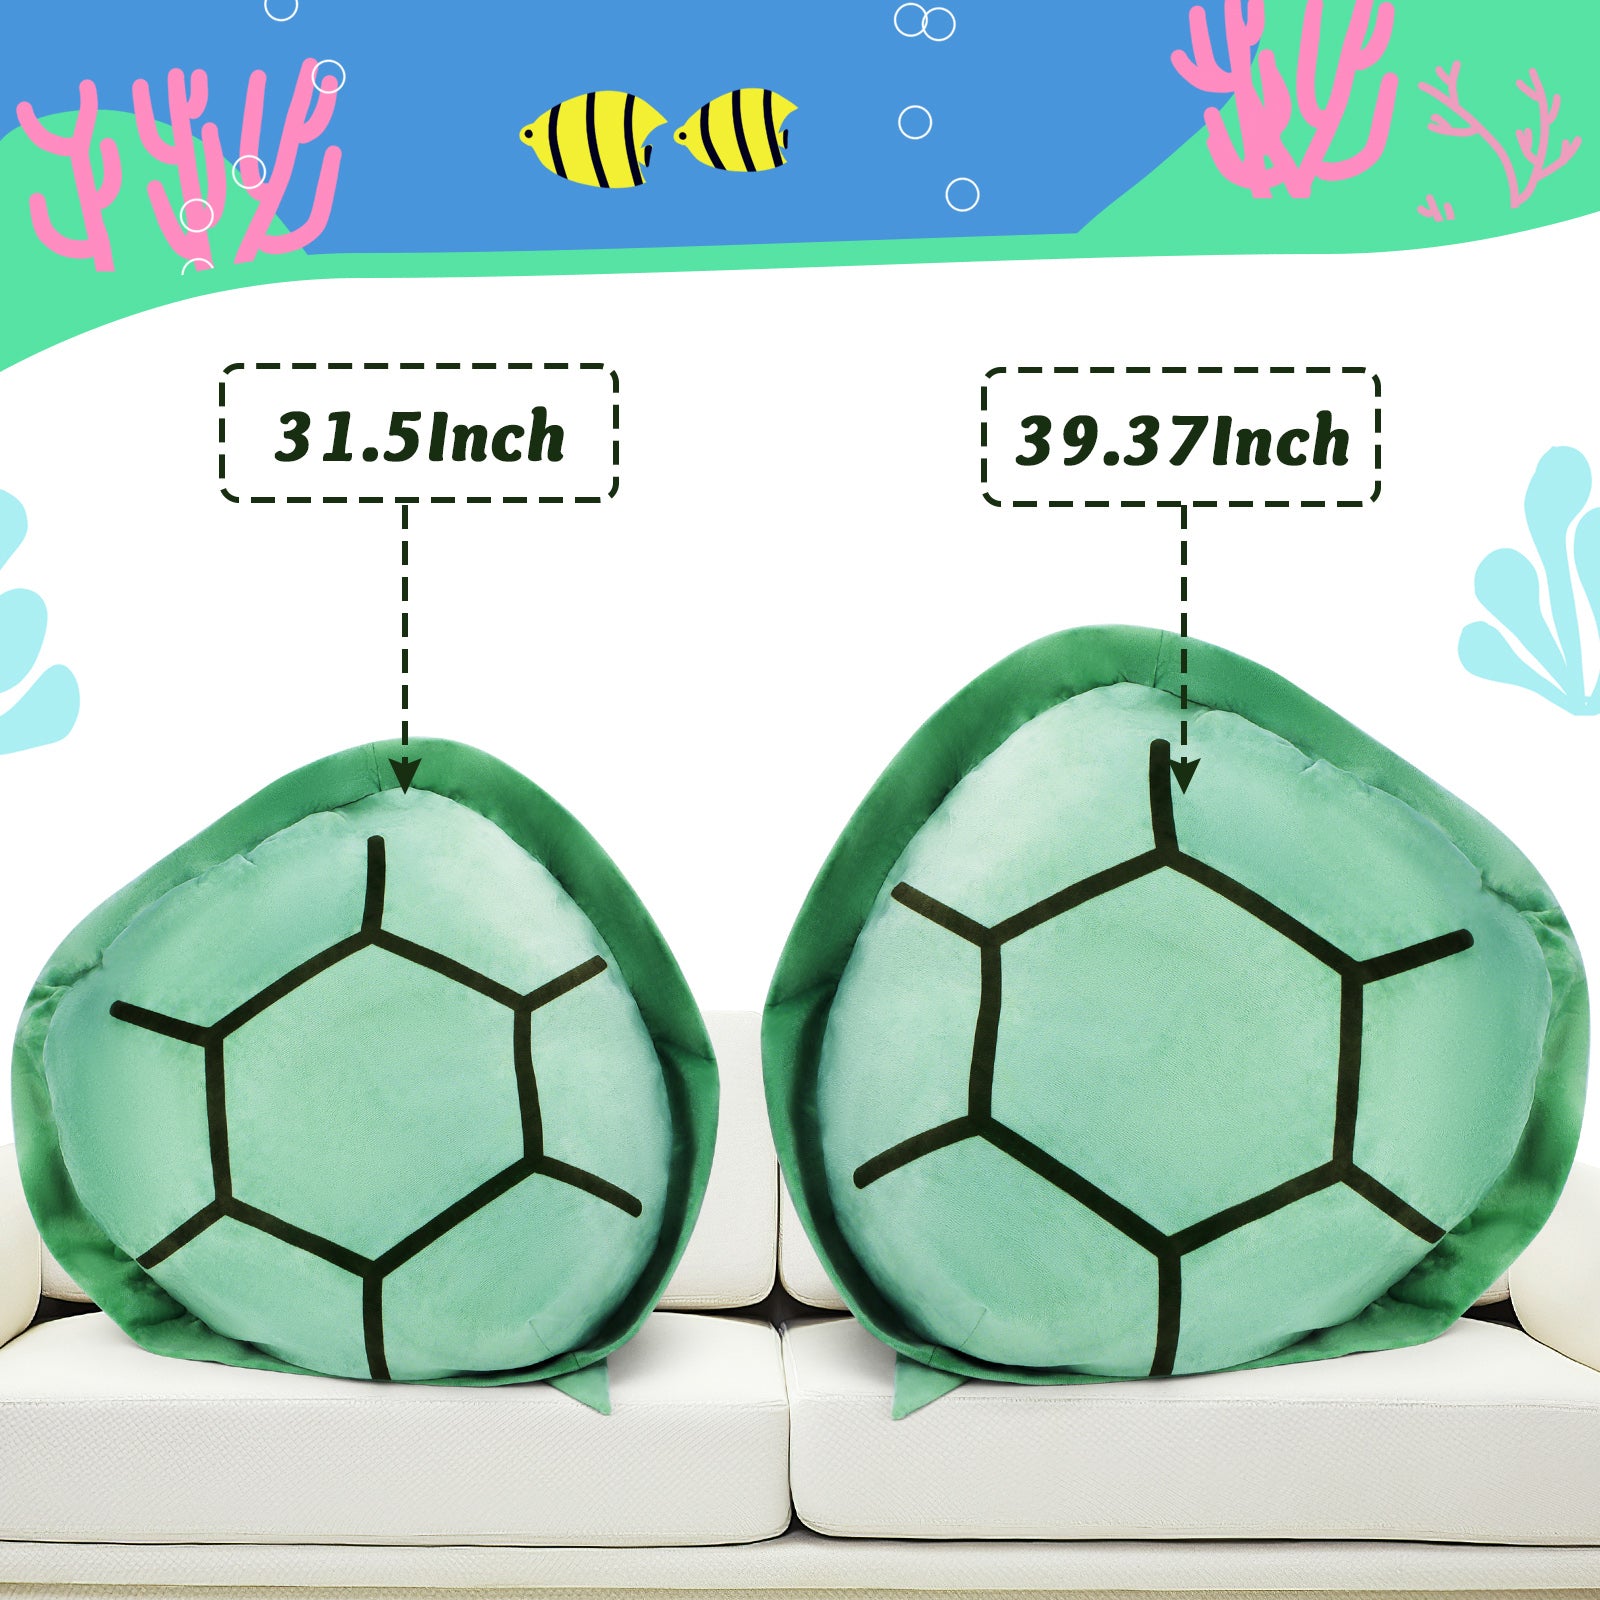 Turtle Shell Plush Doll Wearable Turtle Shell Pillows Costume